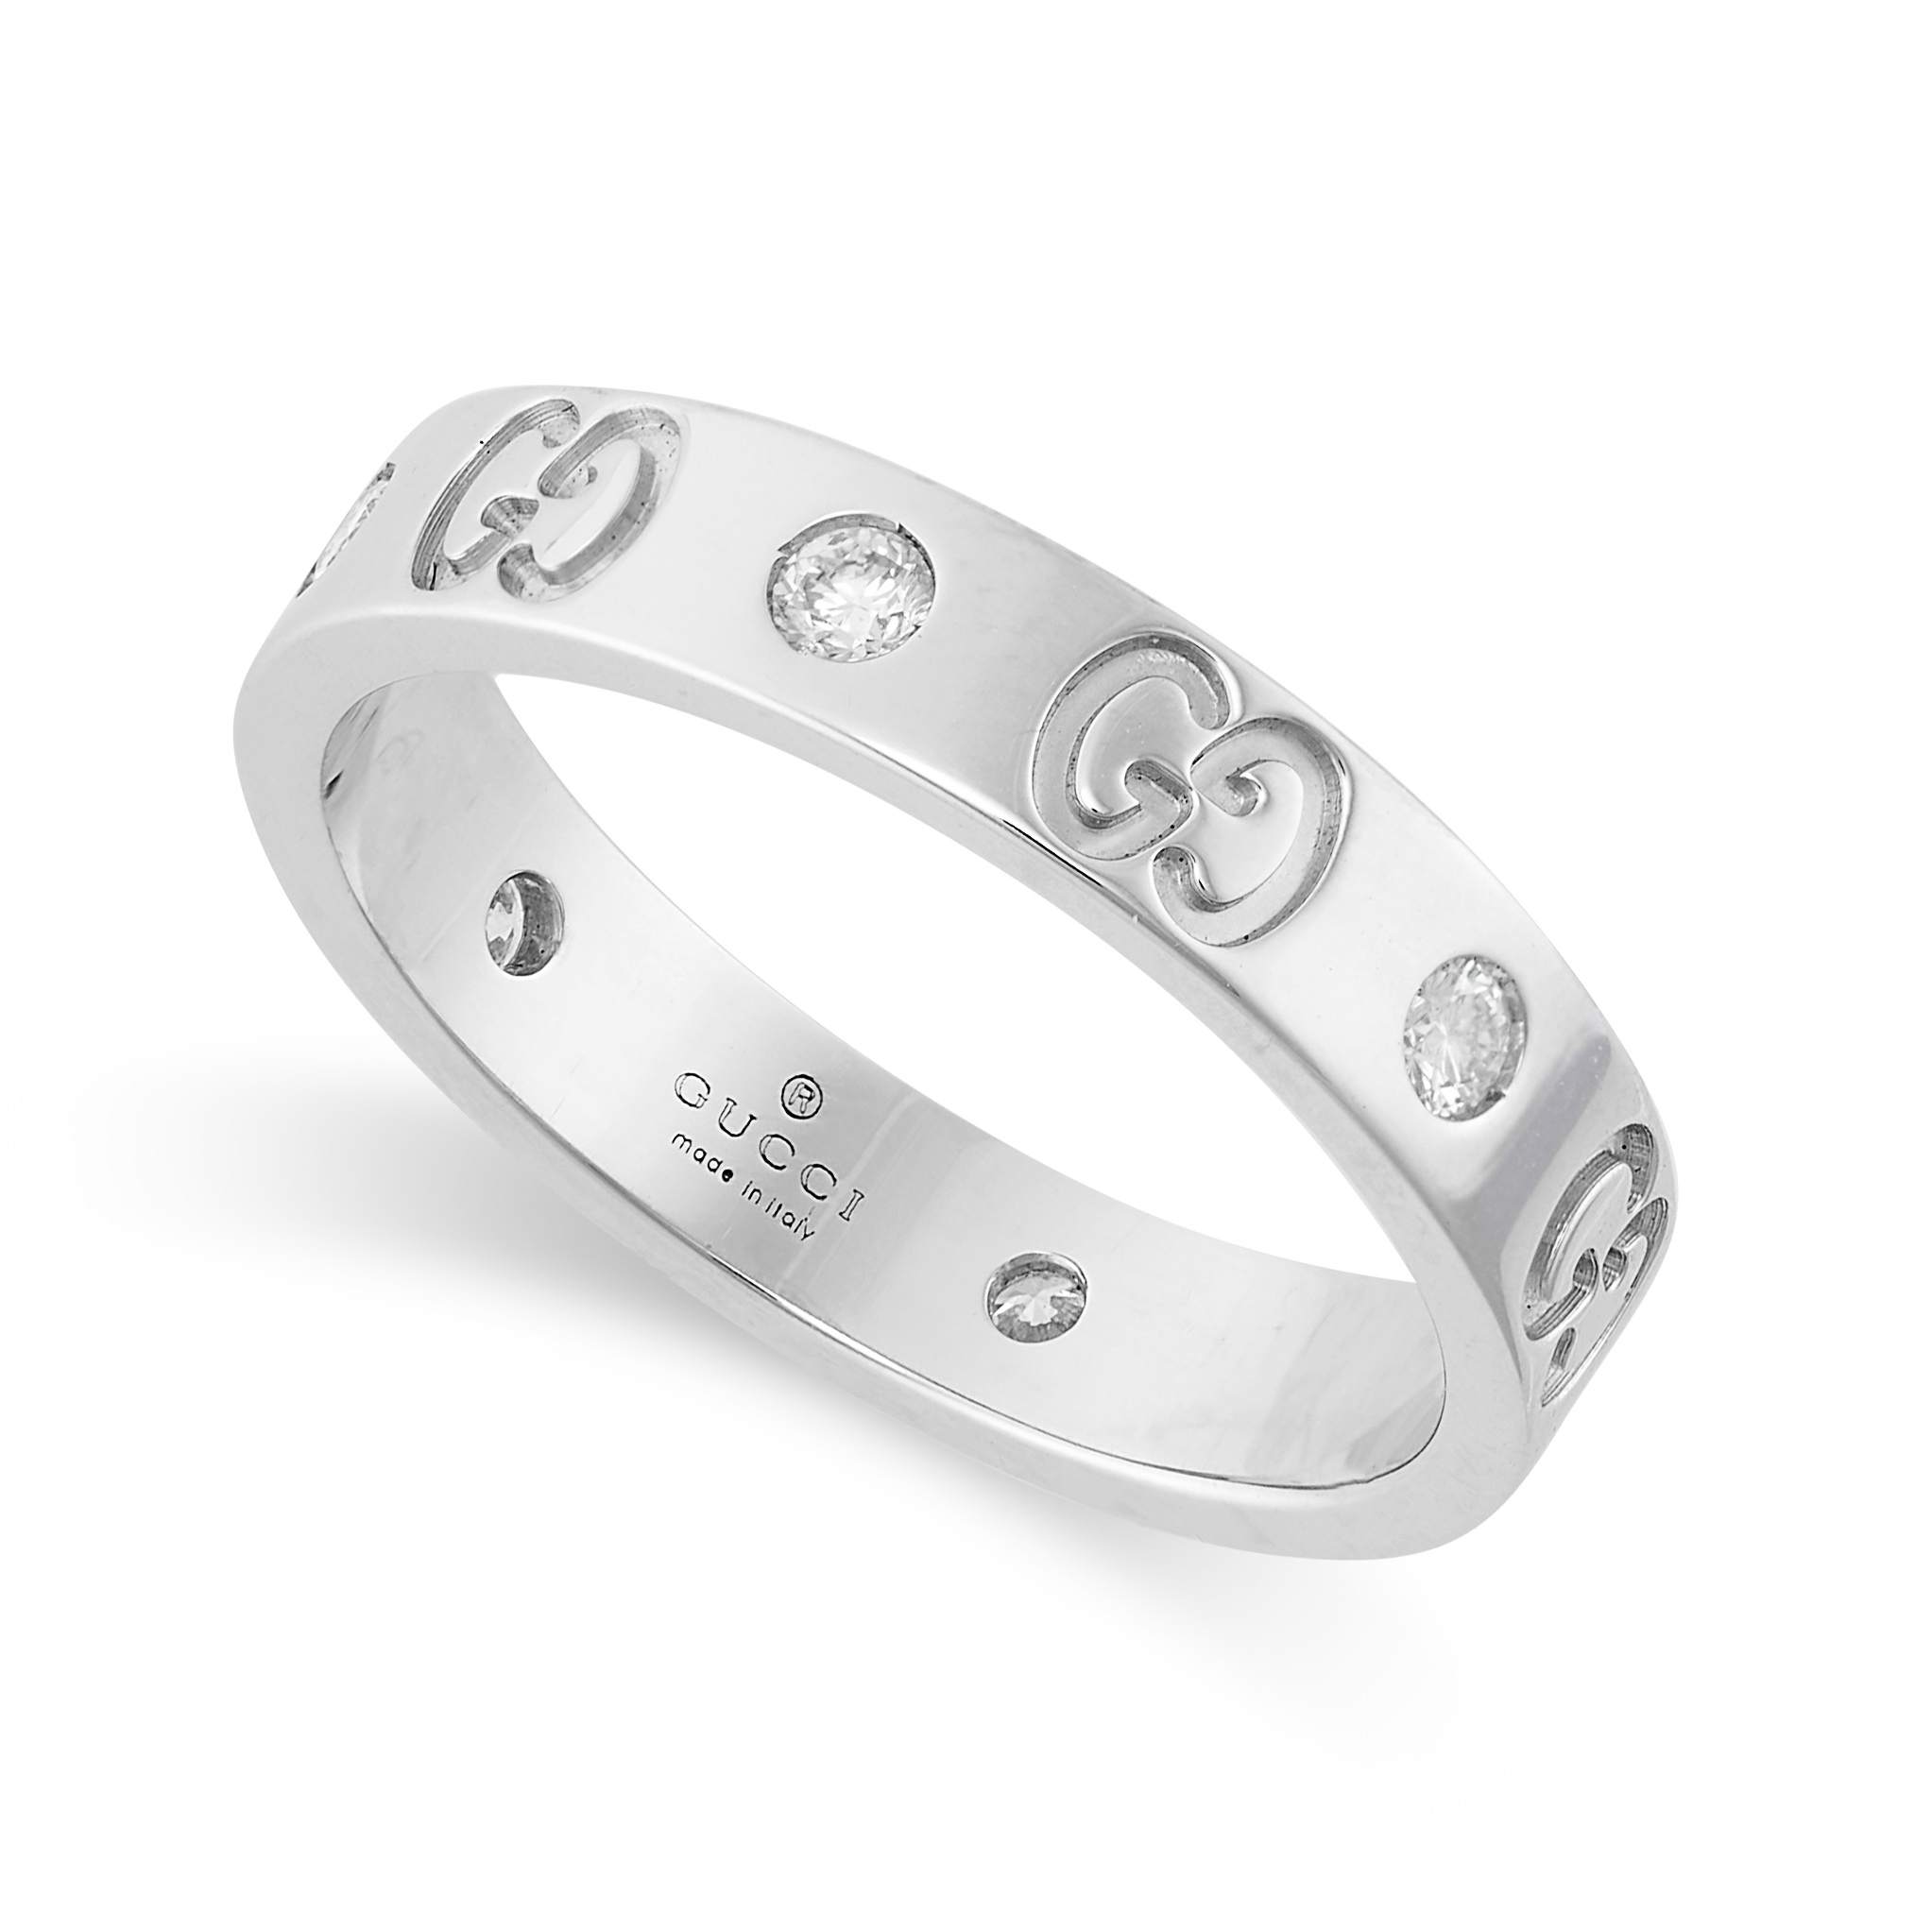 GUCCI, A DIAMOND MONOGRAM RING in 18ct white gold, set with alternating round brilliant cut diamonds - Image 2 of 2